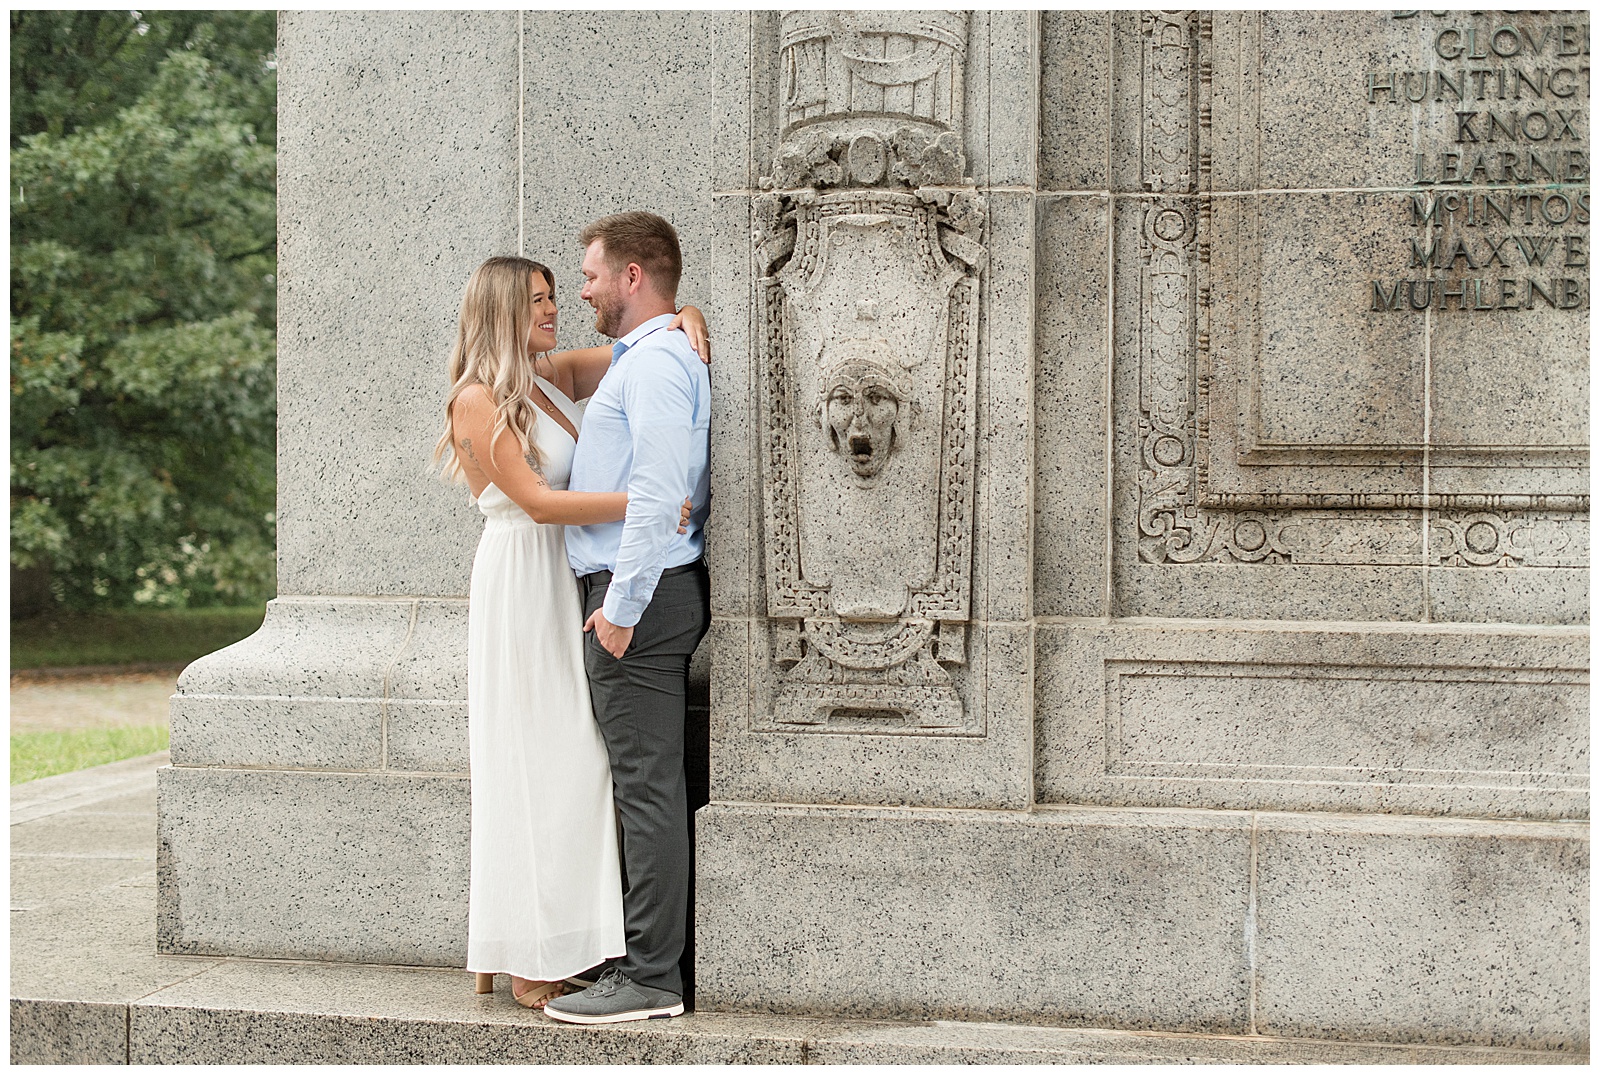 engaged couple standing close together smiling as woman wraps her arms around her man beside the national memorial arch in pennsylvania